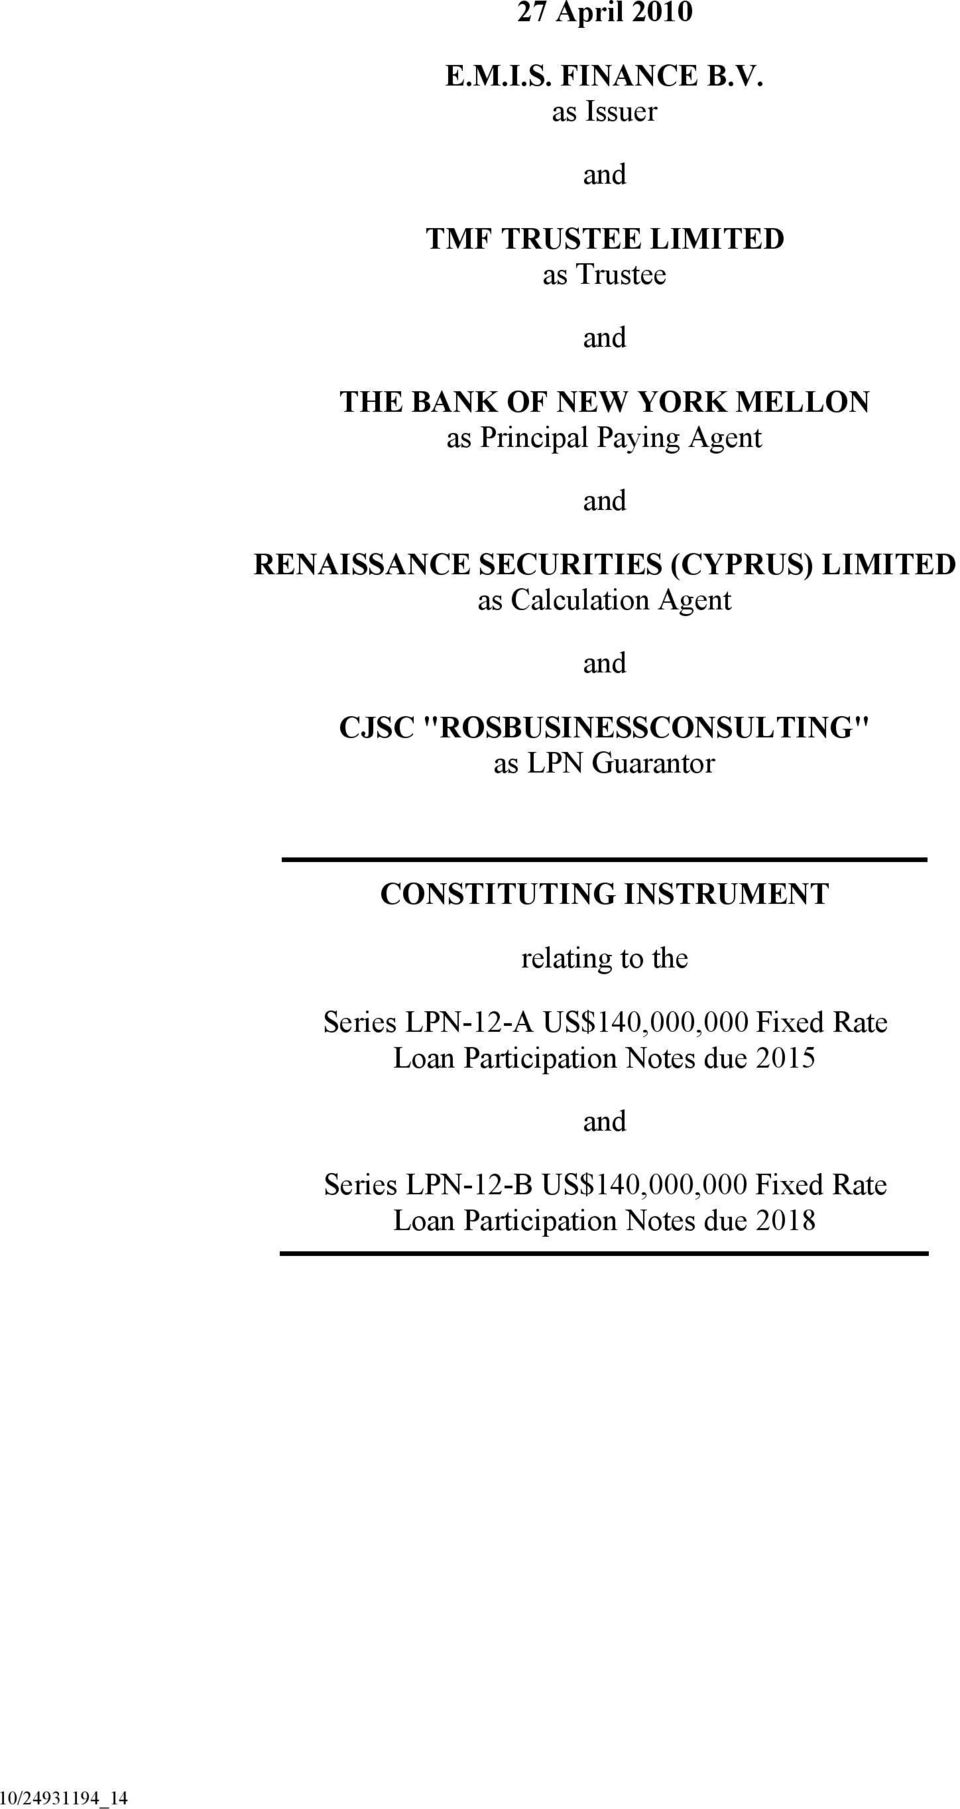 RENAISSANCE SECURITIES (CYPRUS) LIMITED as Calculation Agent and CJSC "ROSBUSINESSCONSULTING" as LPN Guarantor